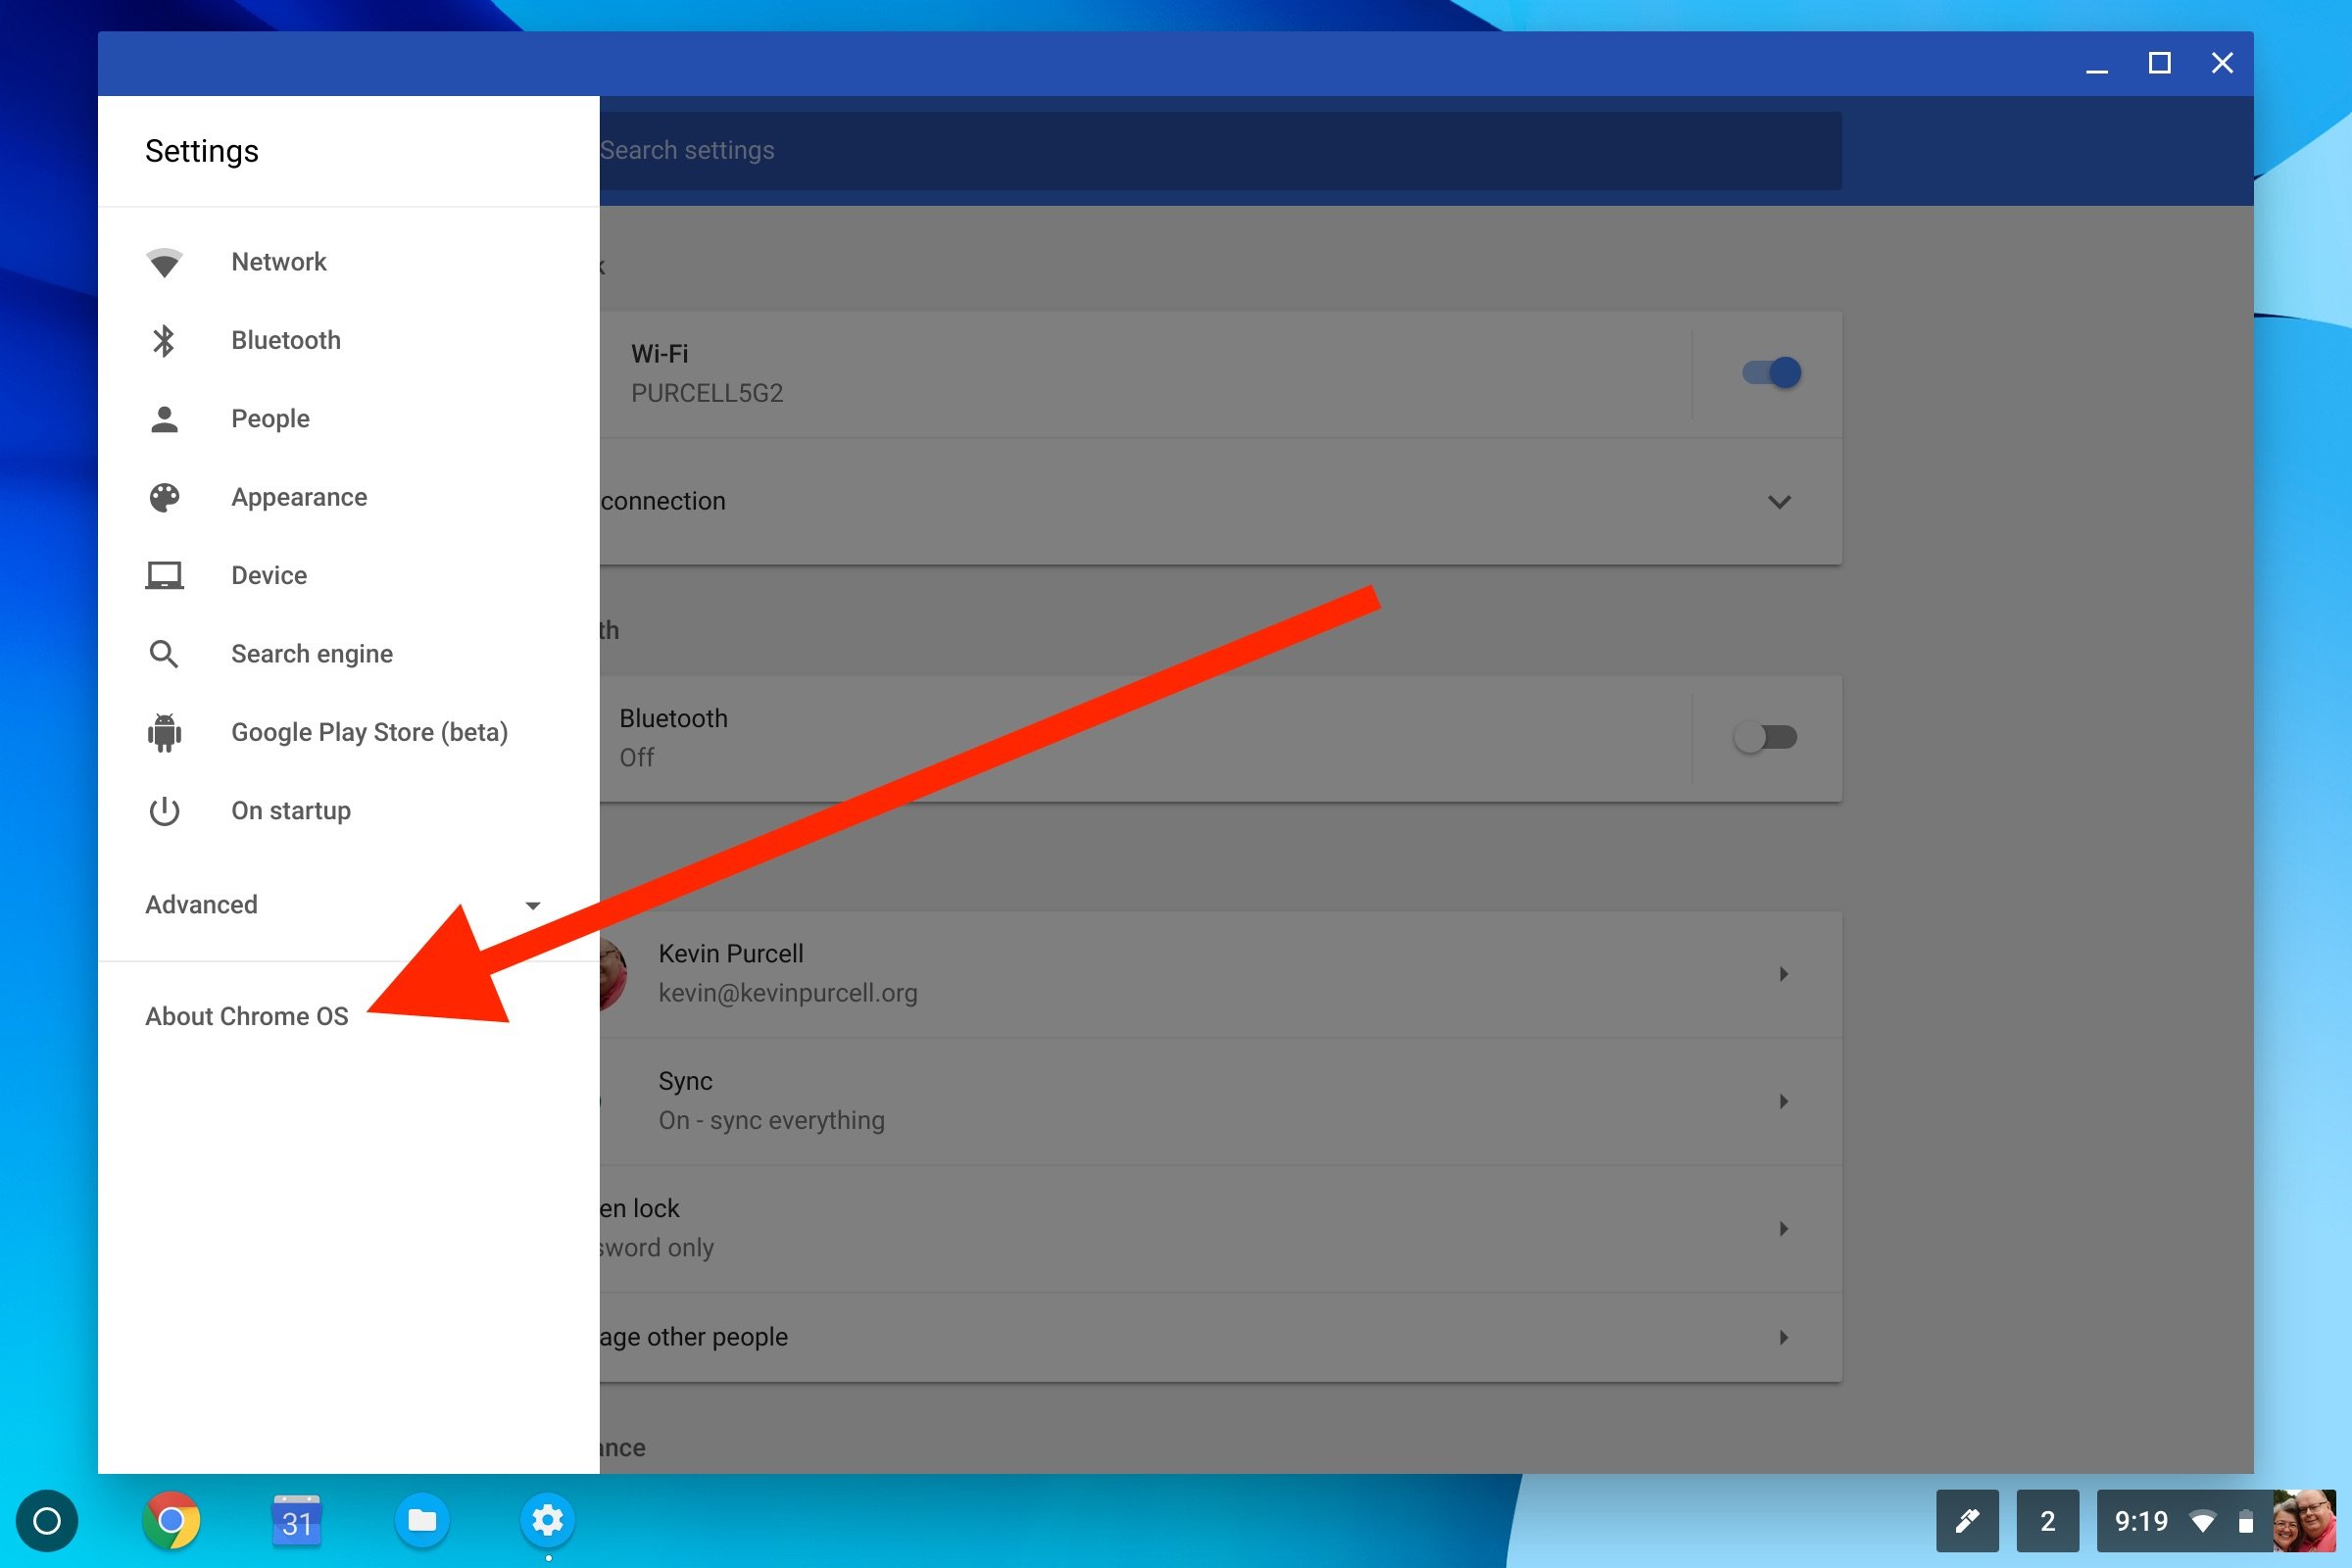 Choose About Chrome OS along the left at the bottom of the list